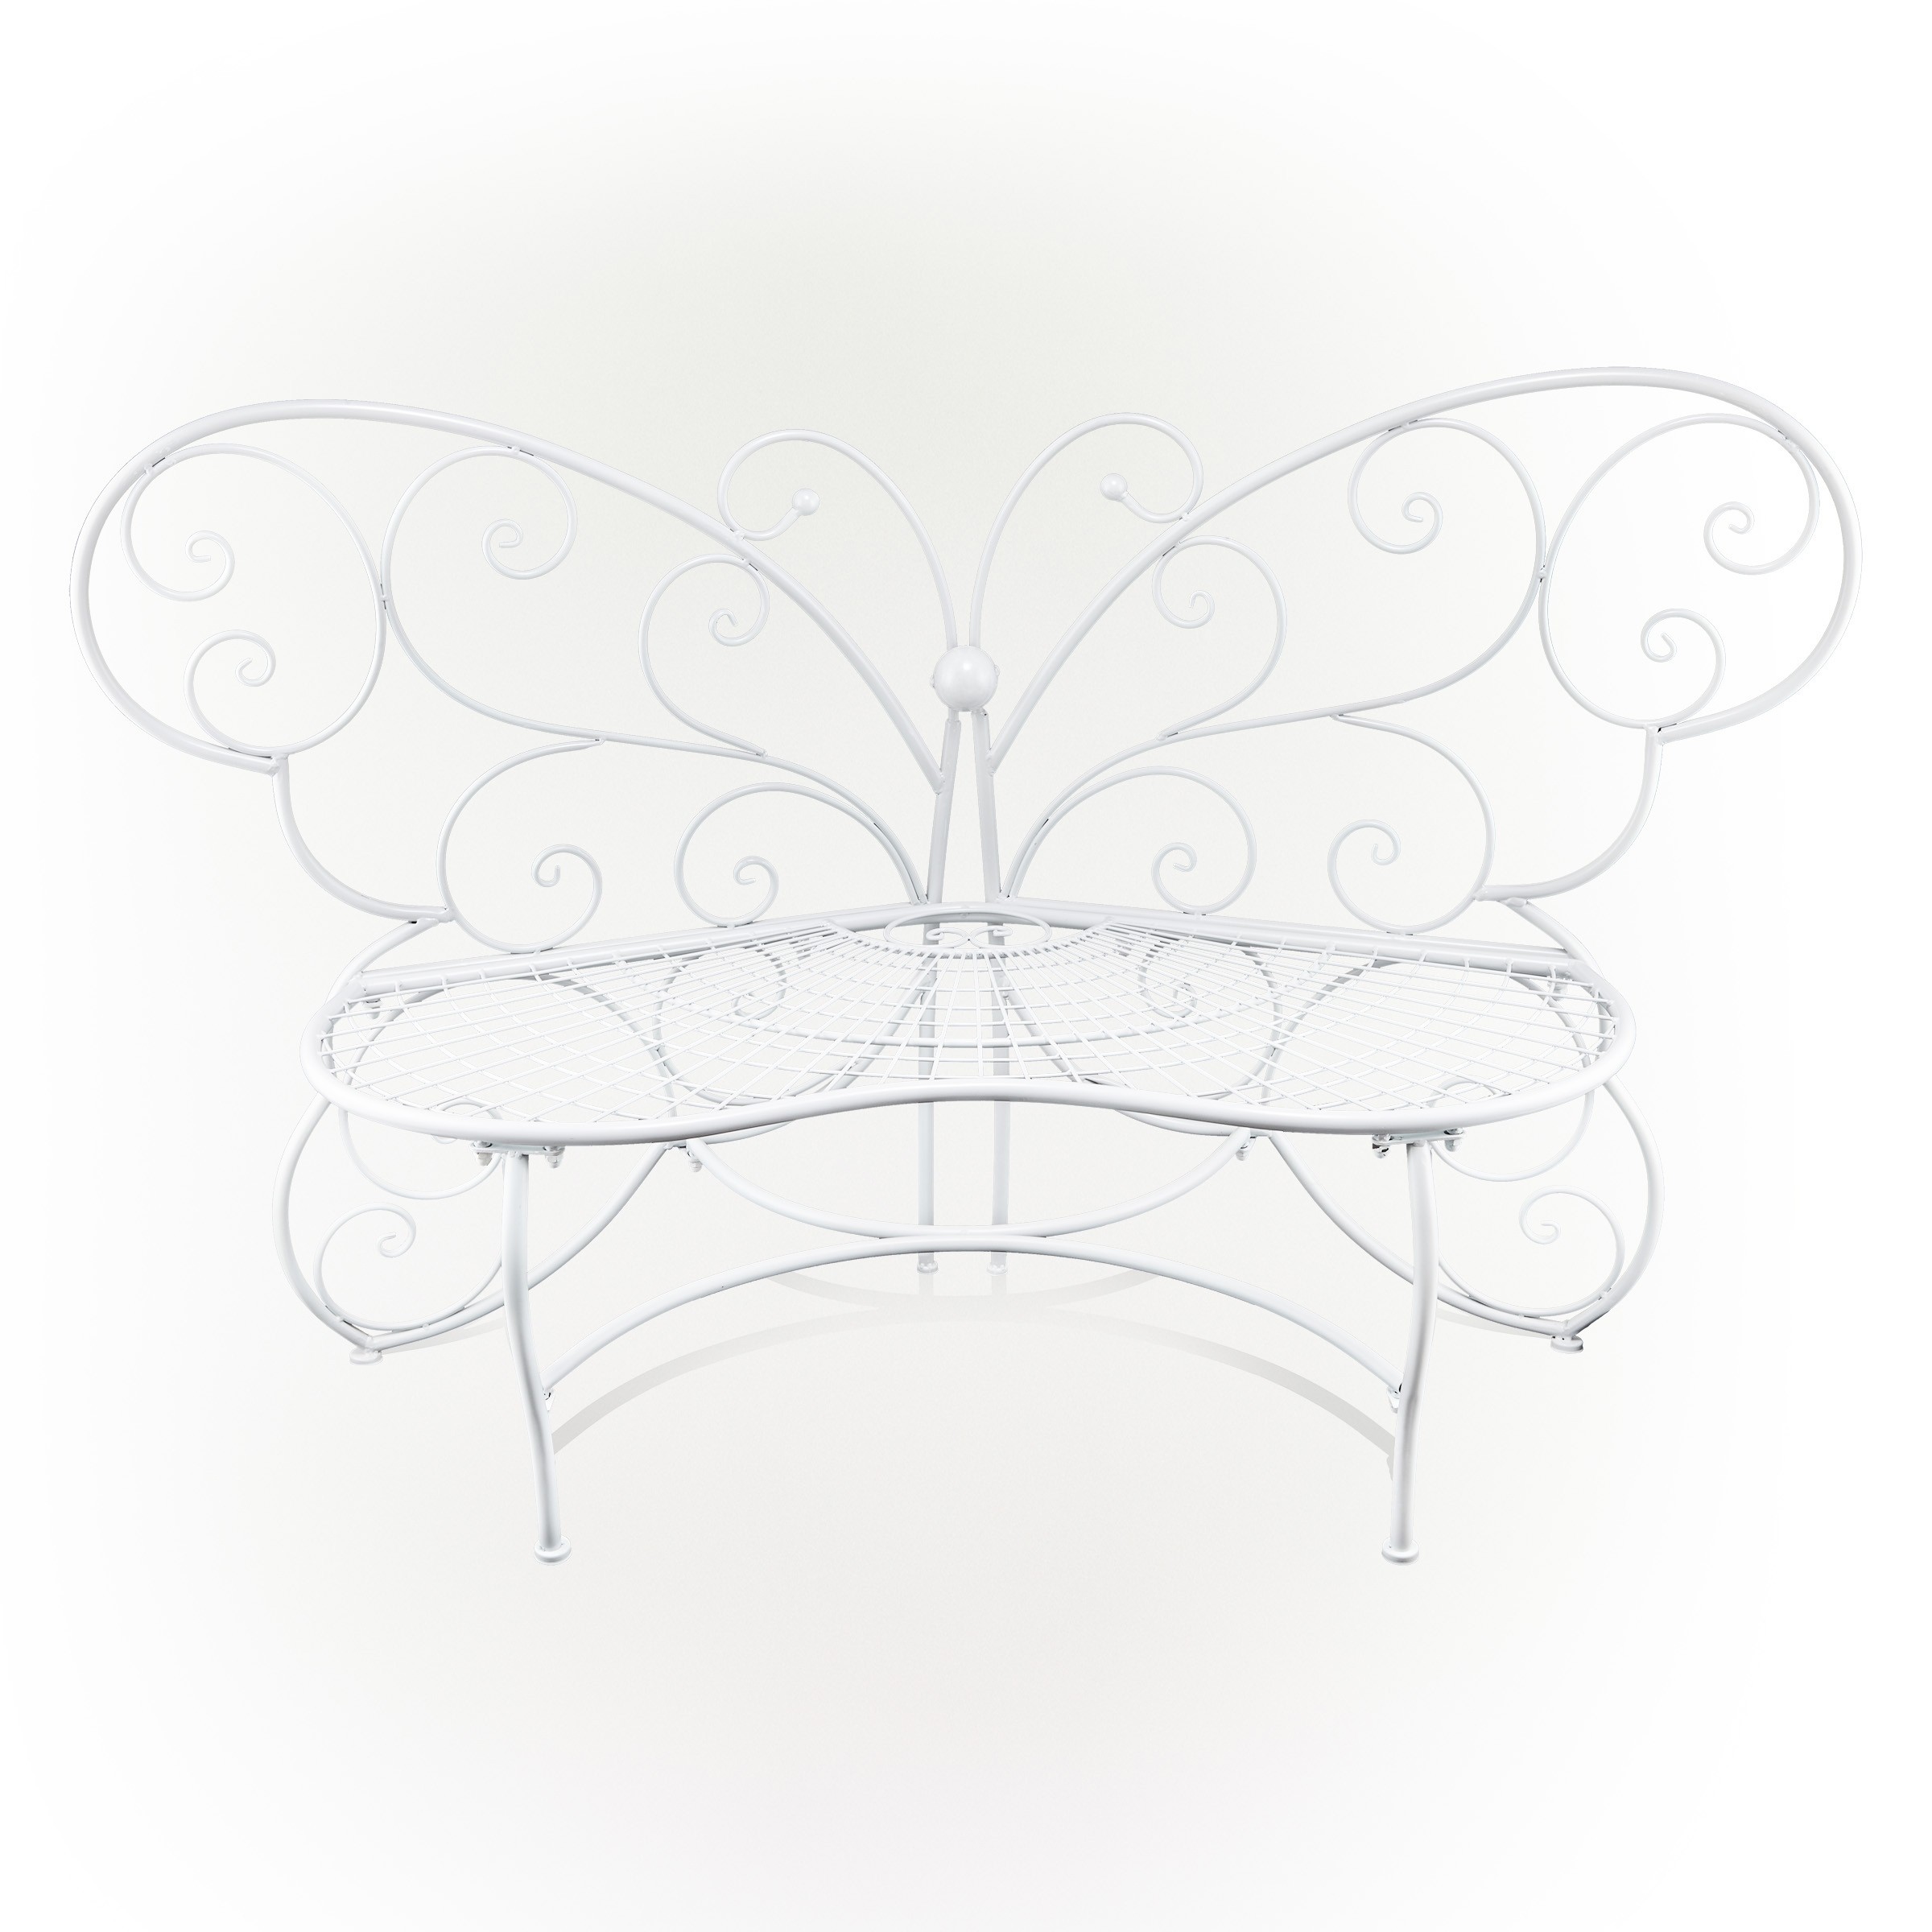 Alpine Corporation 62"L Indoor/Outdoor 2 Person Metal Butterfly Shaped Garden Bench, White